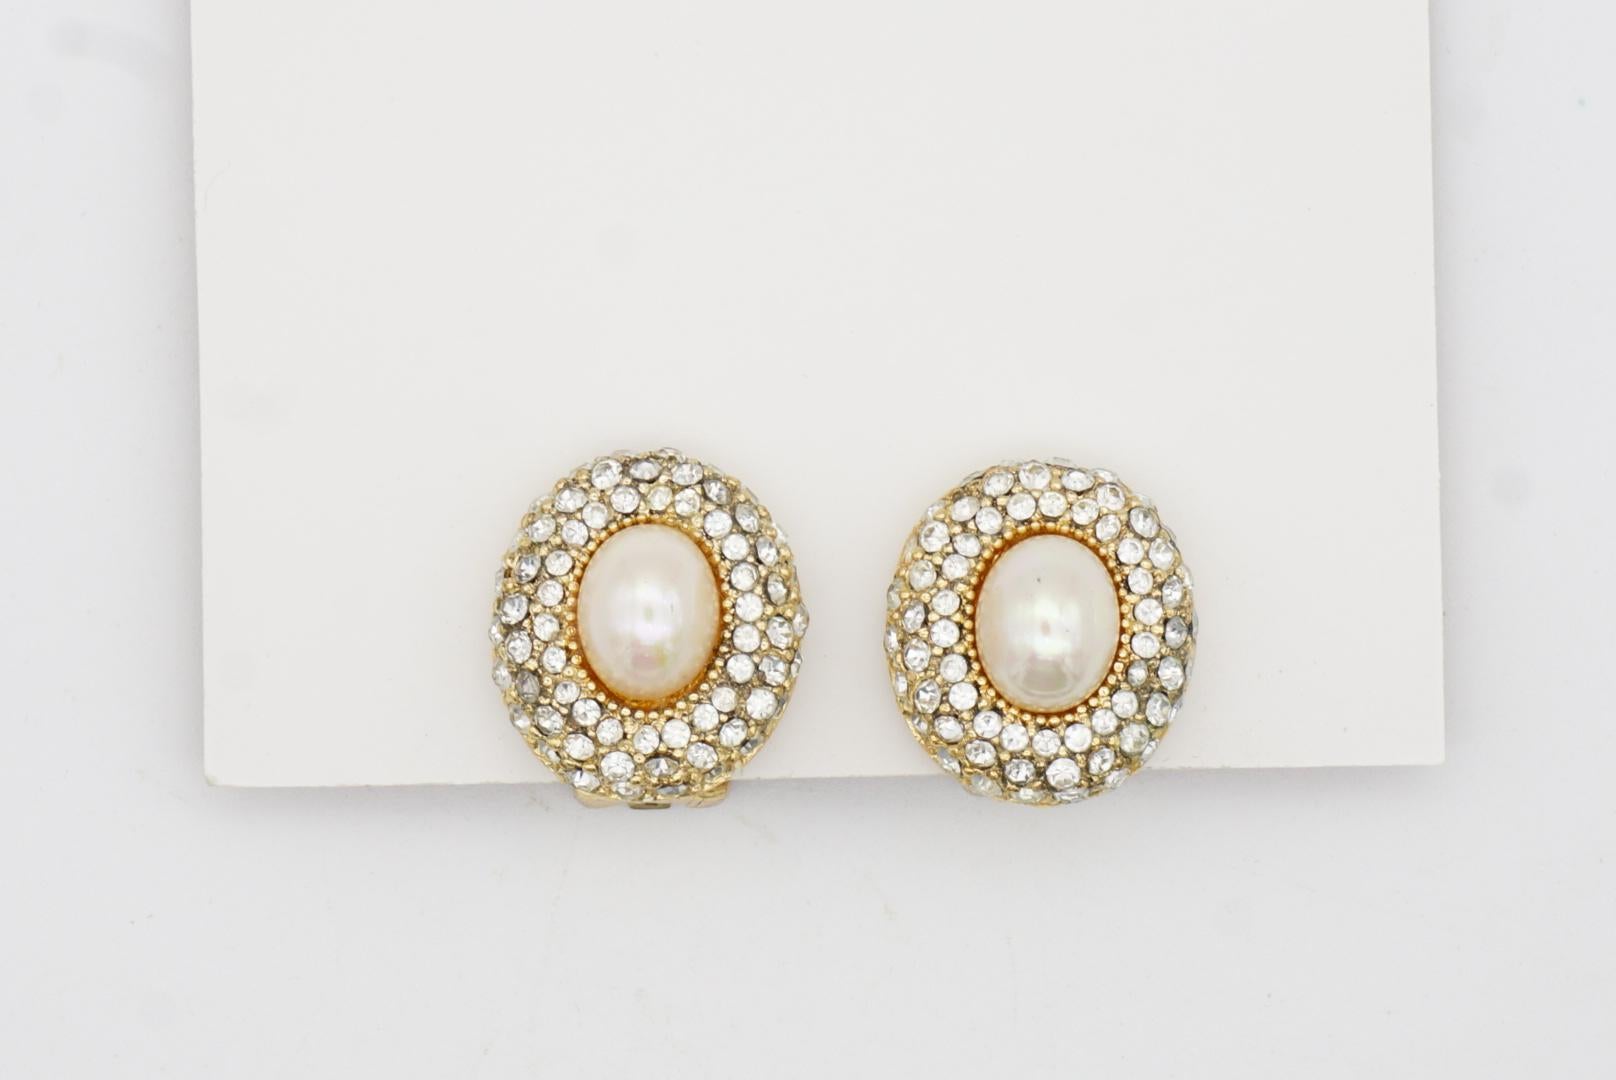 Christian Dior Vintage 1980s Oval White Pearl Shining Crystals Clip On Earrings For Sale 3